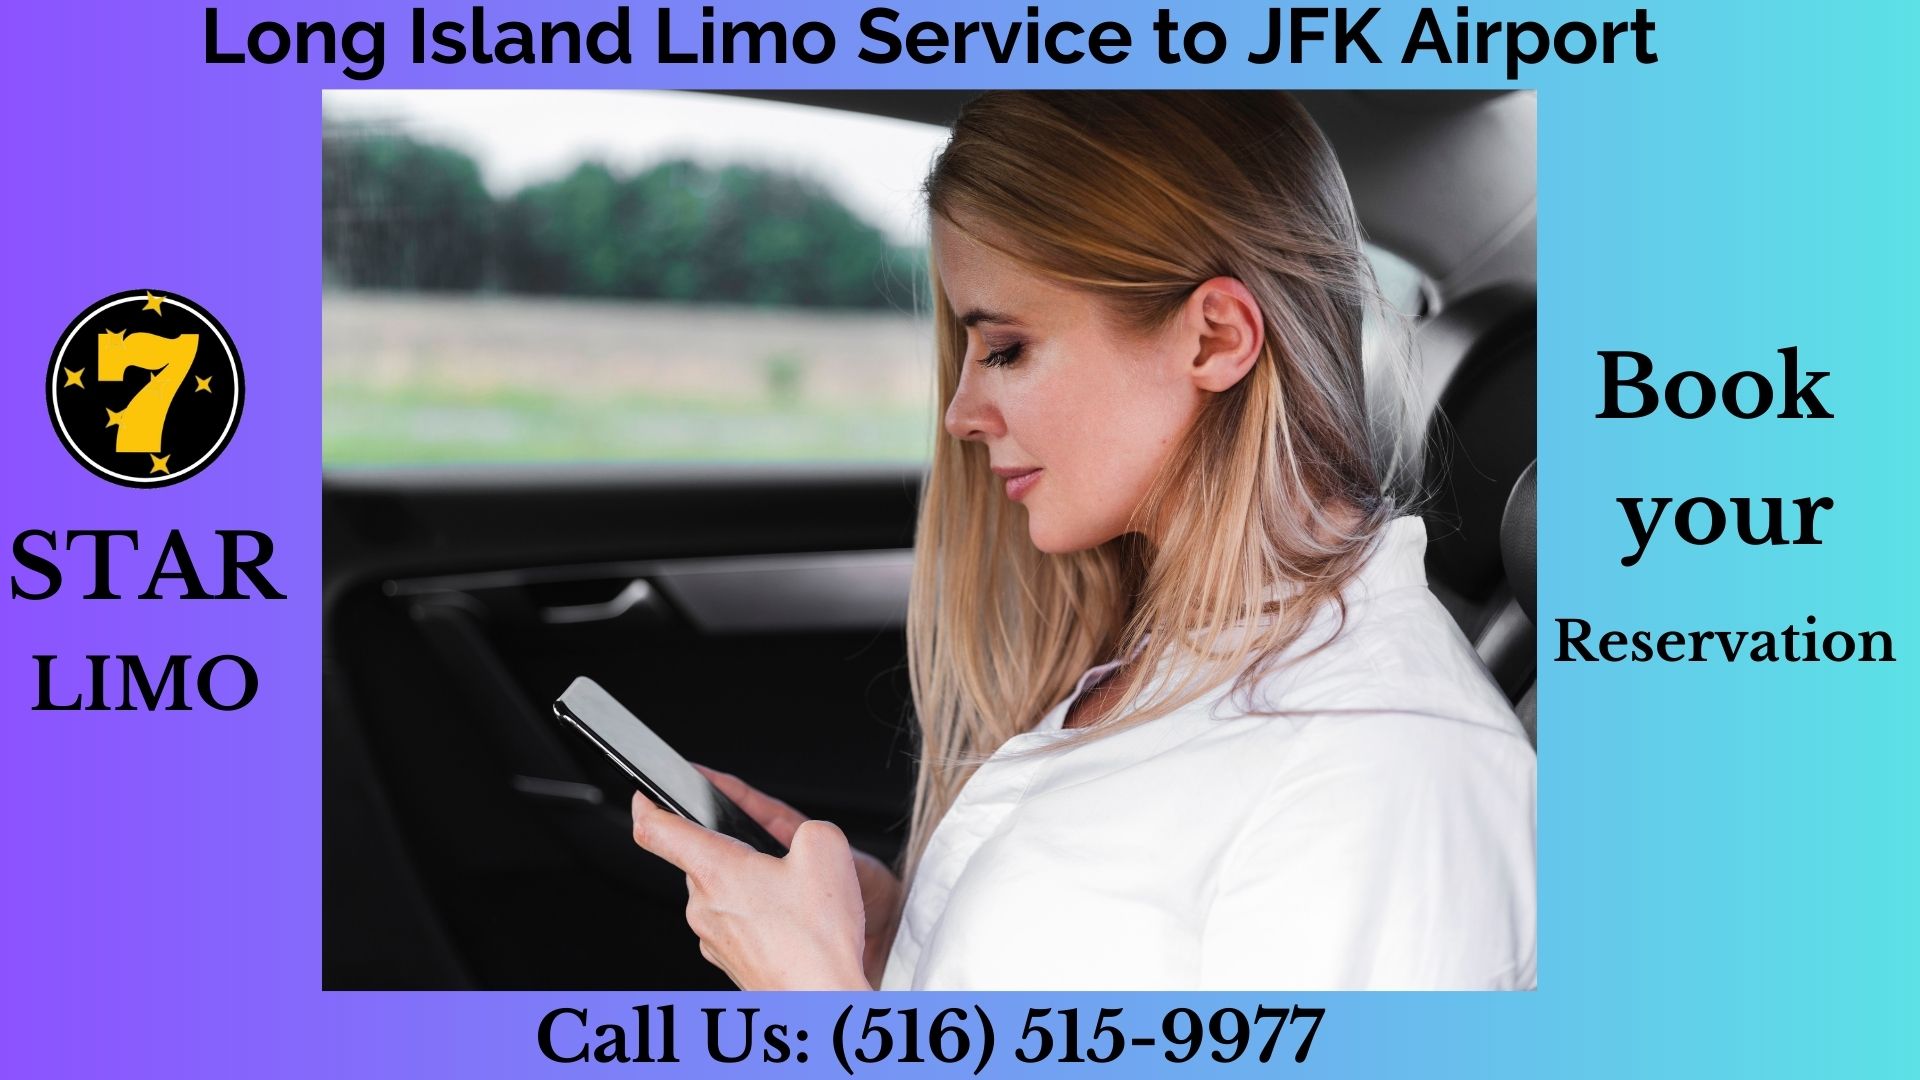 Long Island Limo Service to JFK Airport